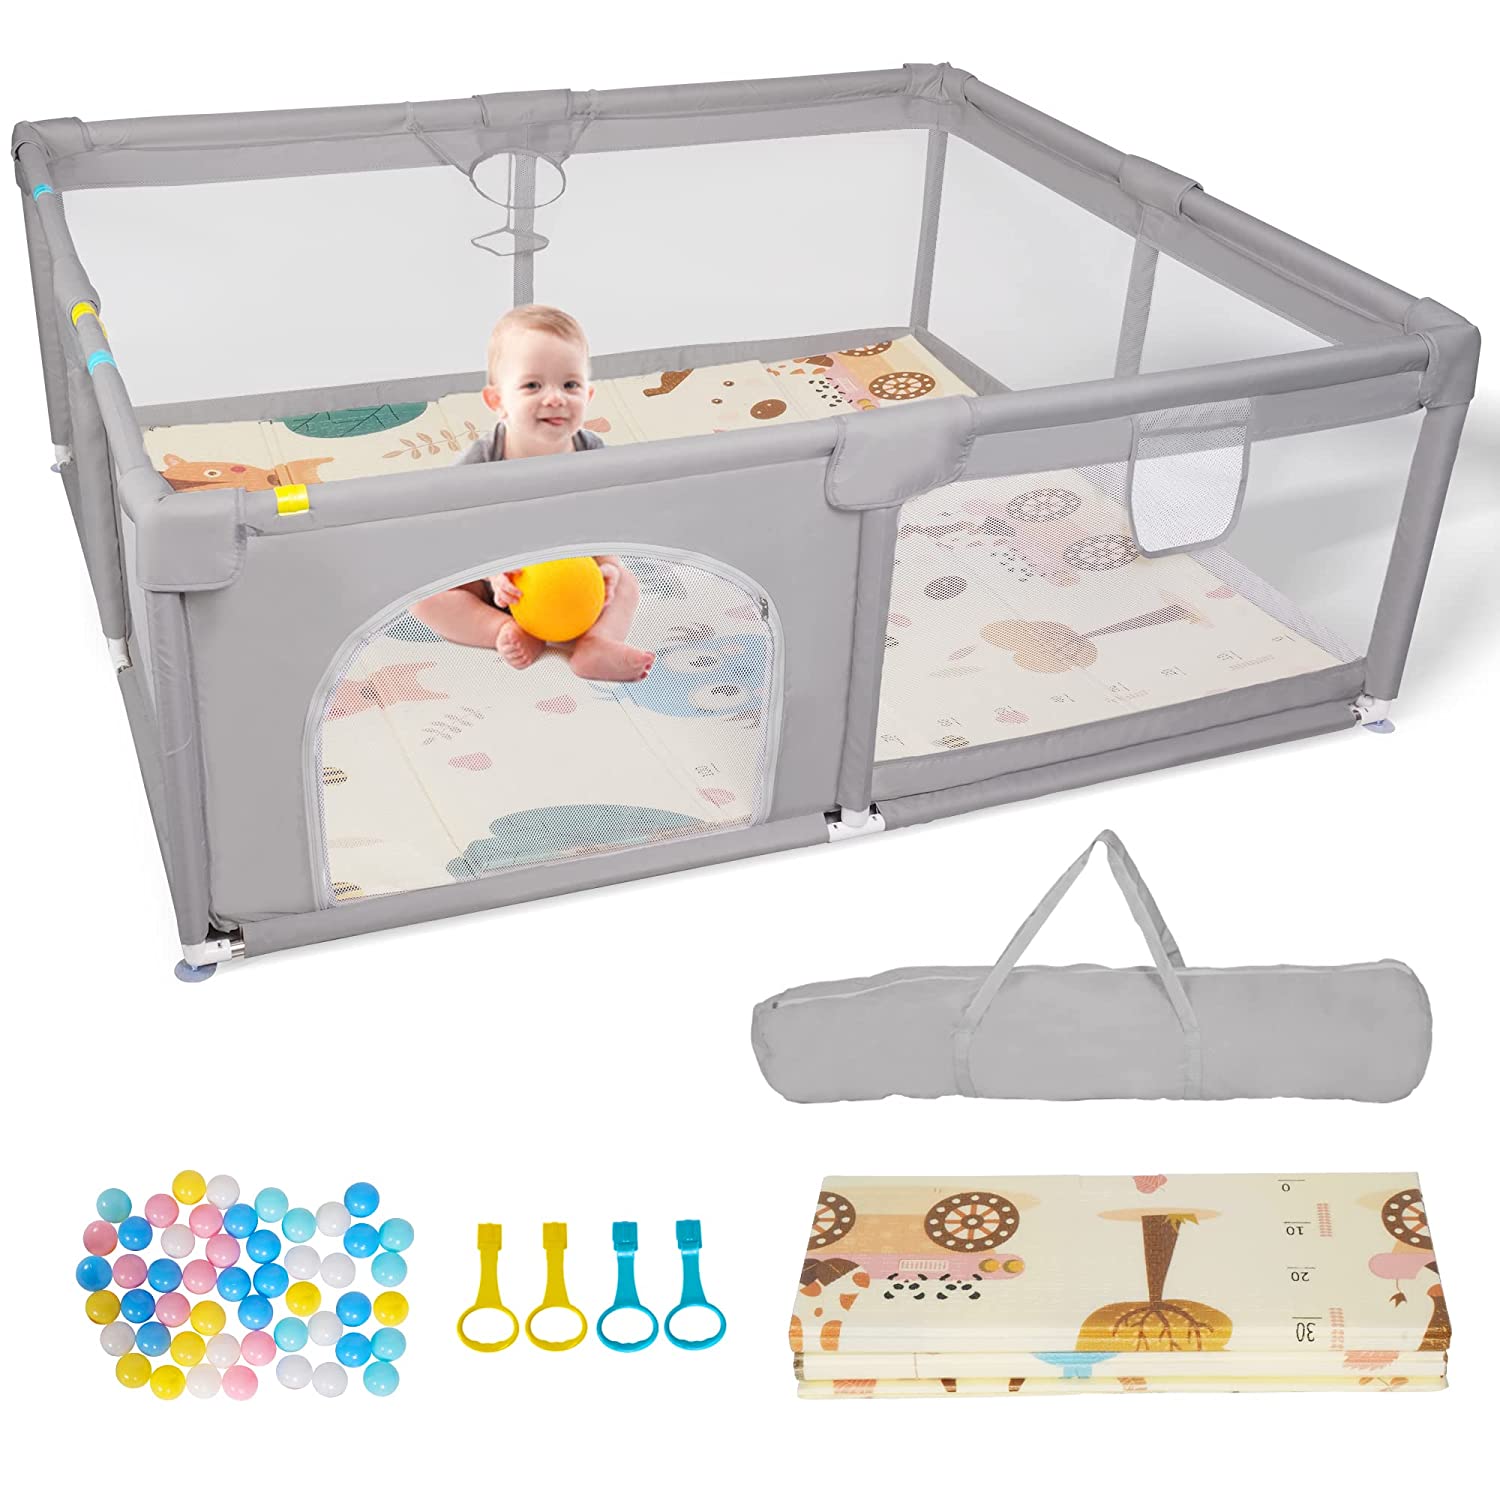 (Out of Stock) Portable Large Baby Playpen Fence Play Yards (71"x59") with Anti-Slip Bas, Mat Breathable & Mesh